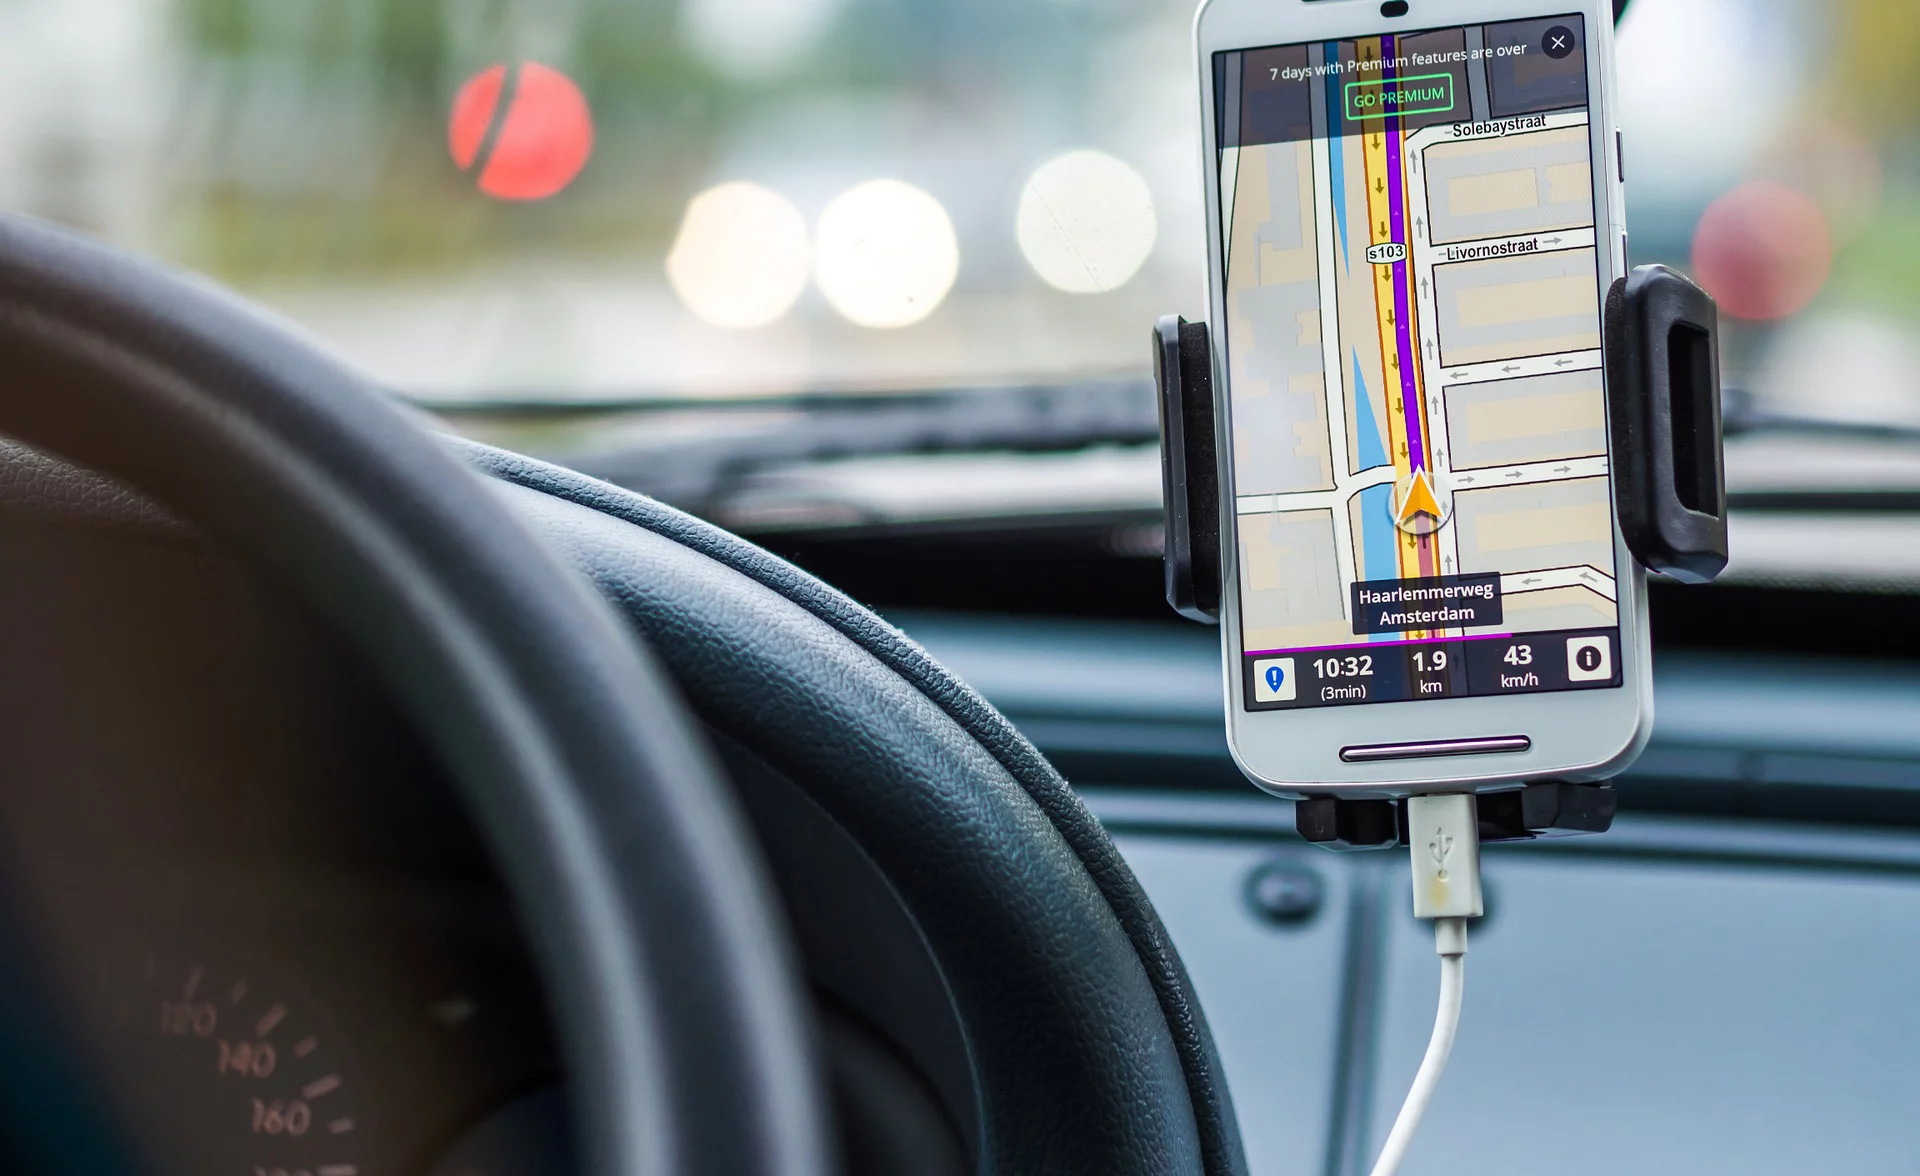 Mobile Telematics Applications – Global Markets and Technologies